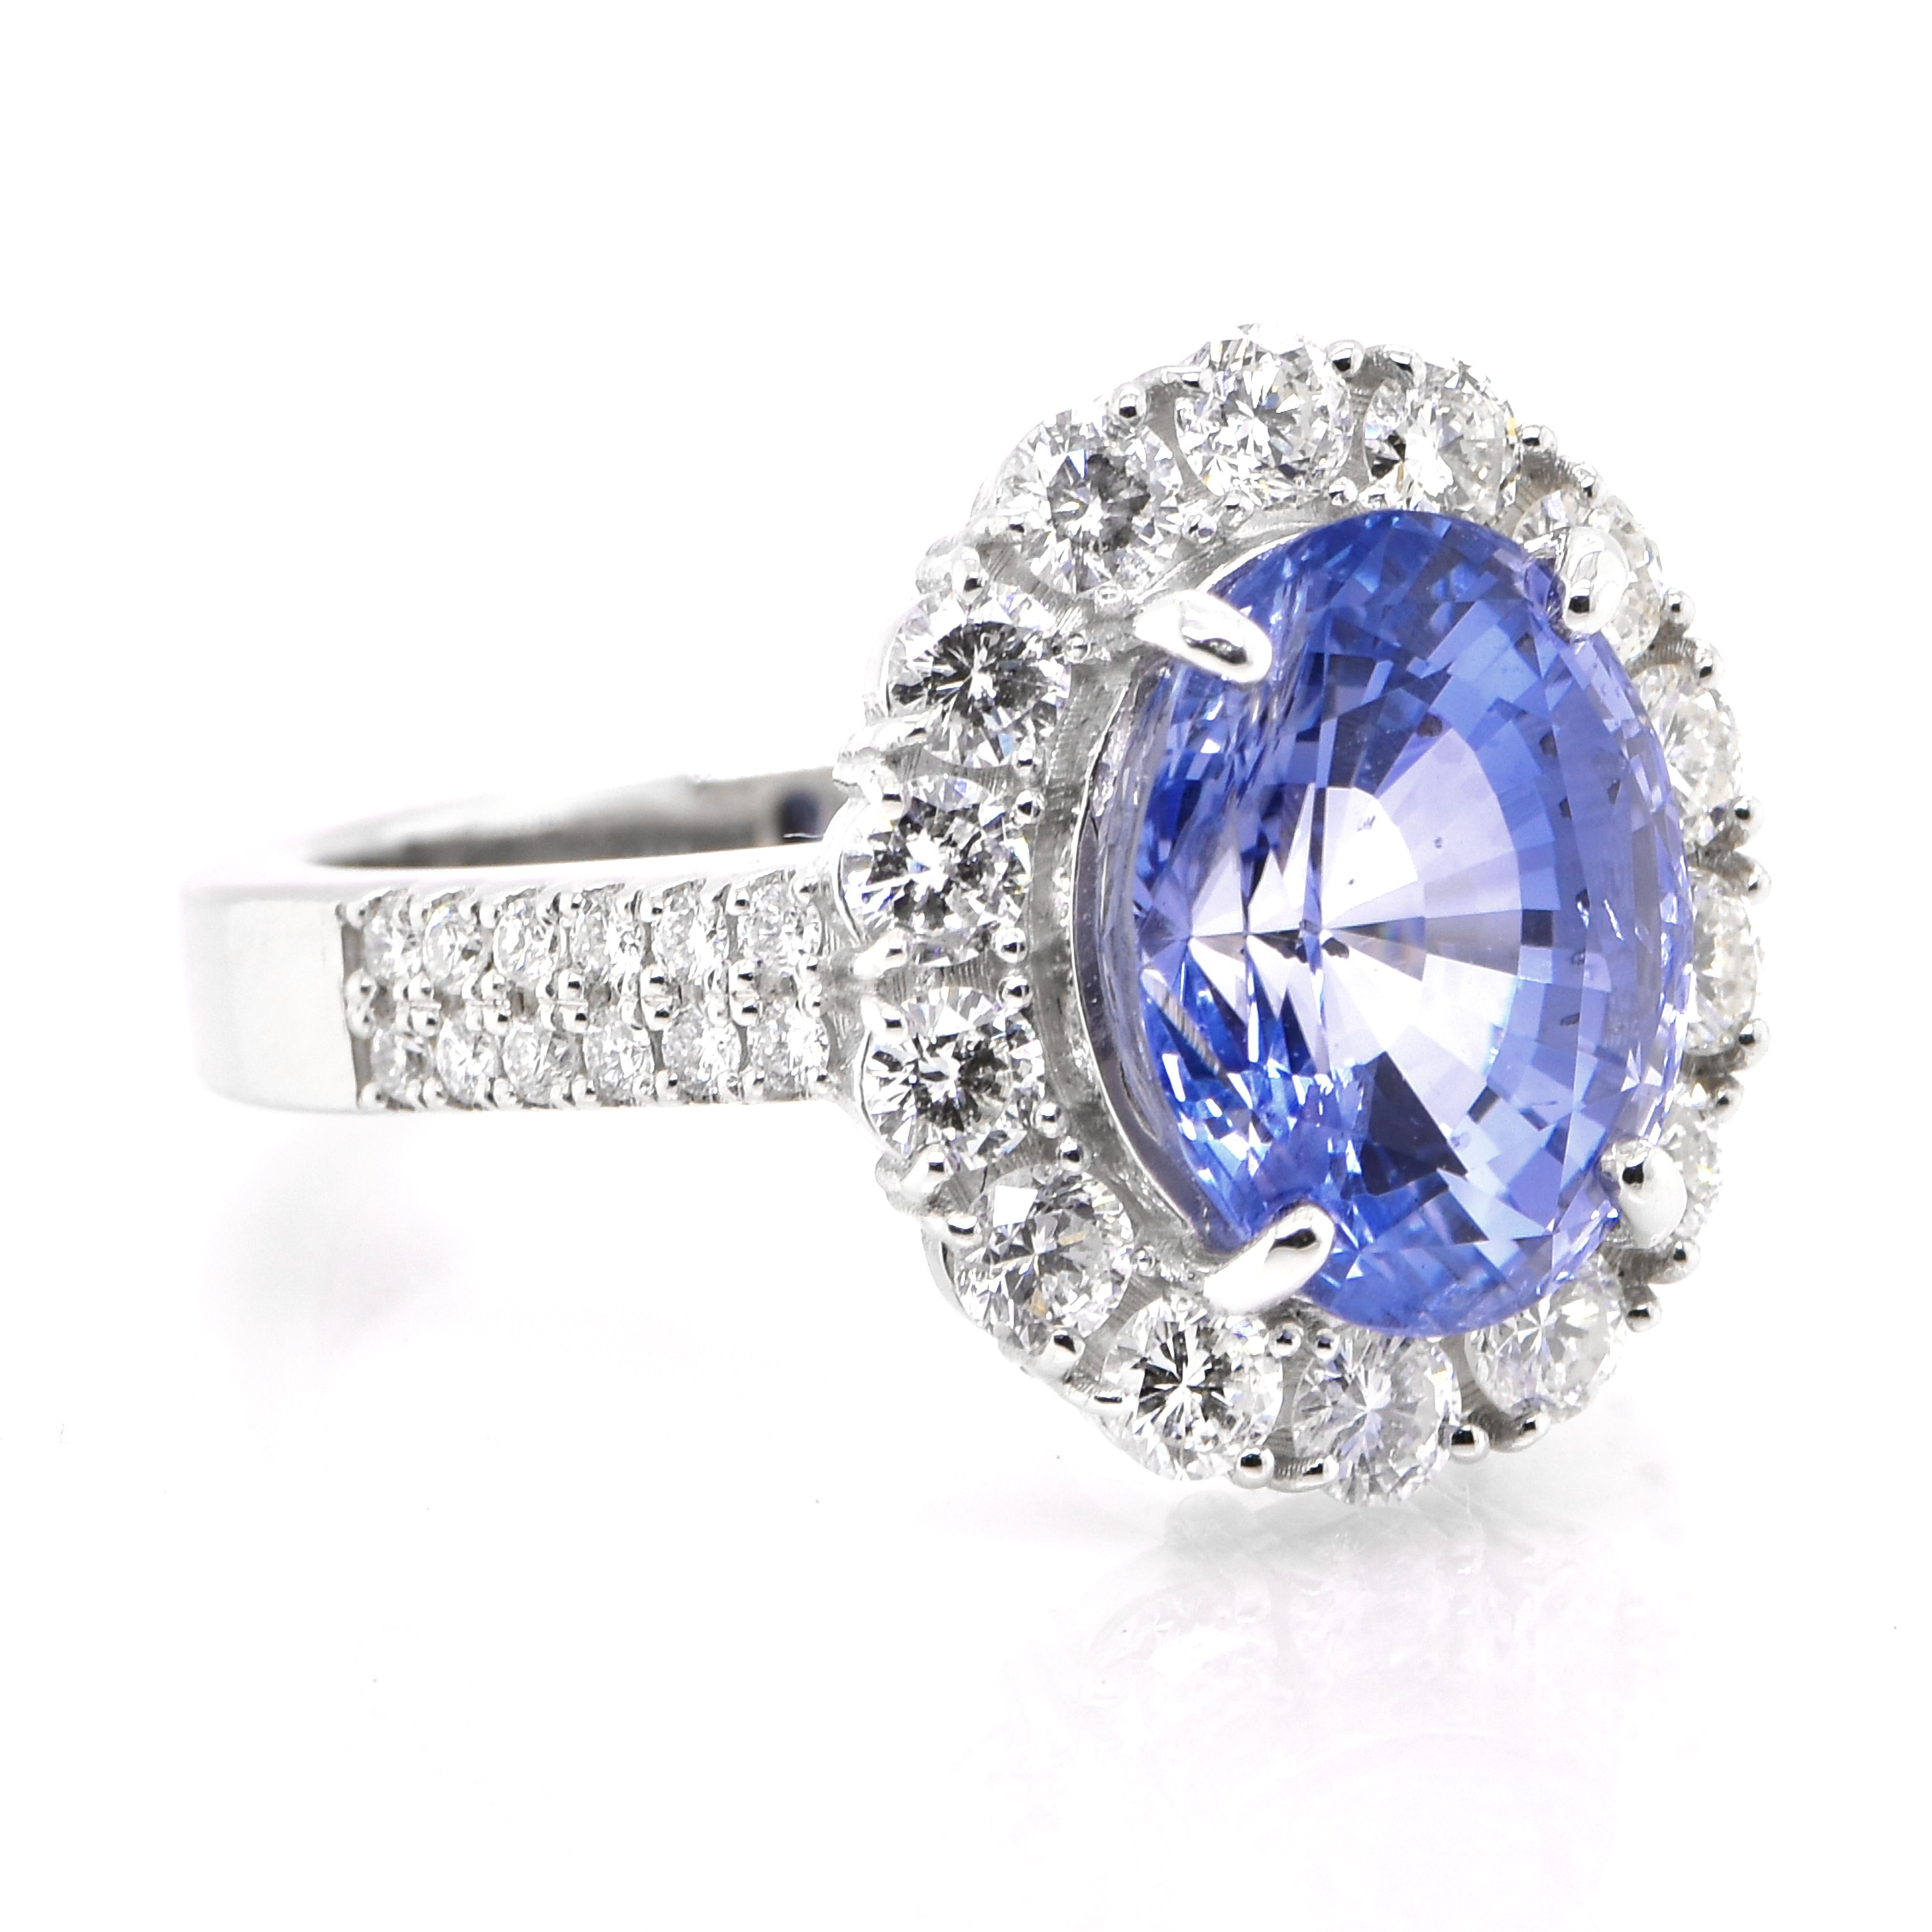 Modern 6.00 Carat Natural Unheated Sapphire and Diamond Cocktail Ring Made in Platinum For Sale